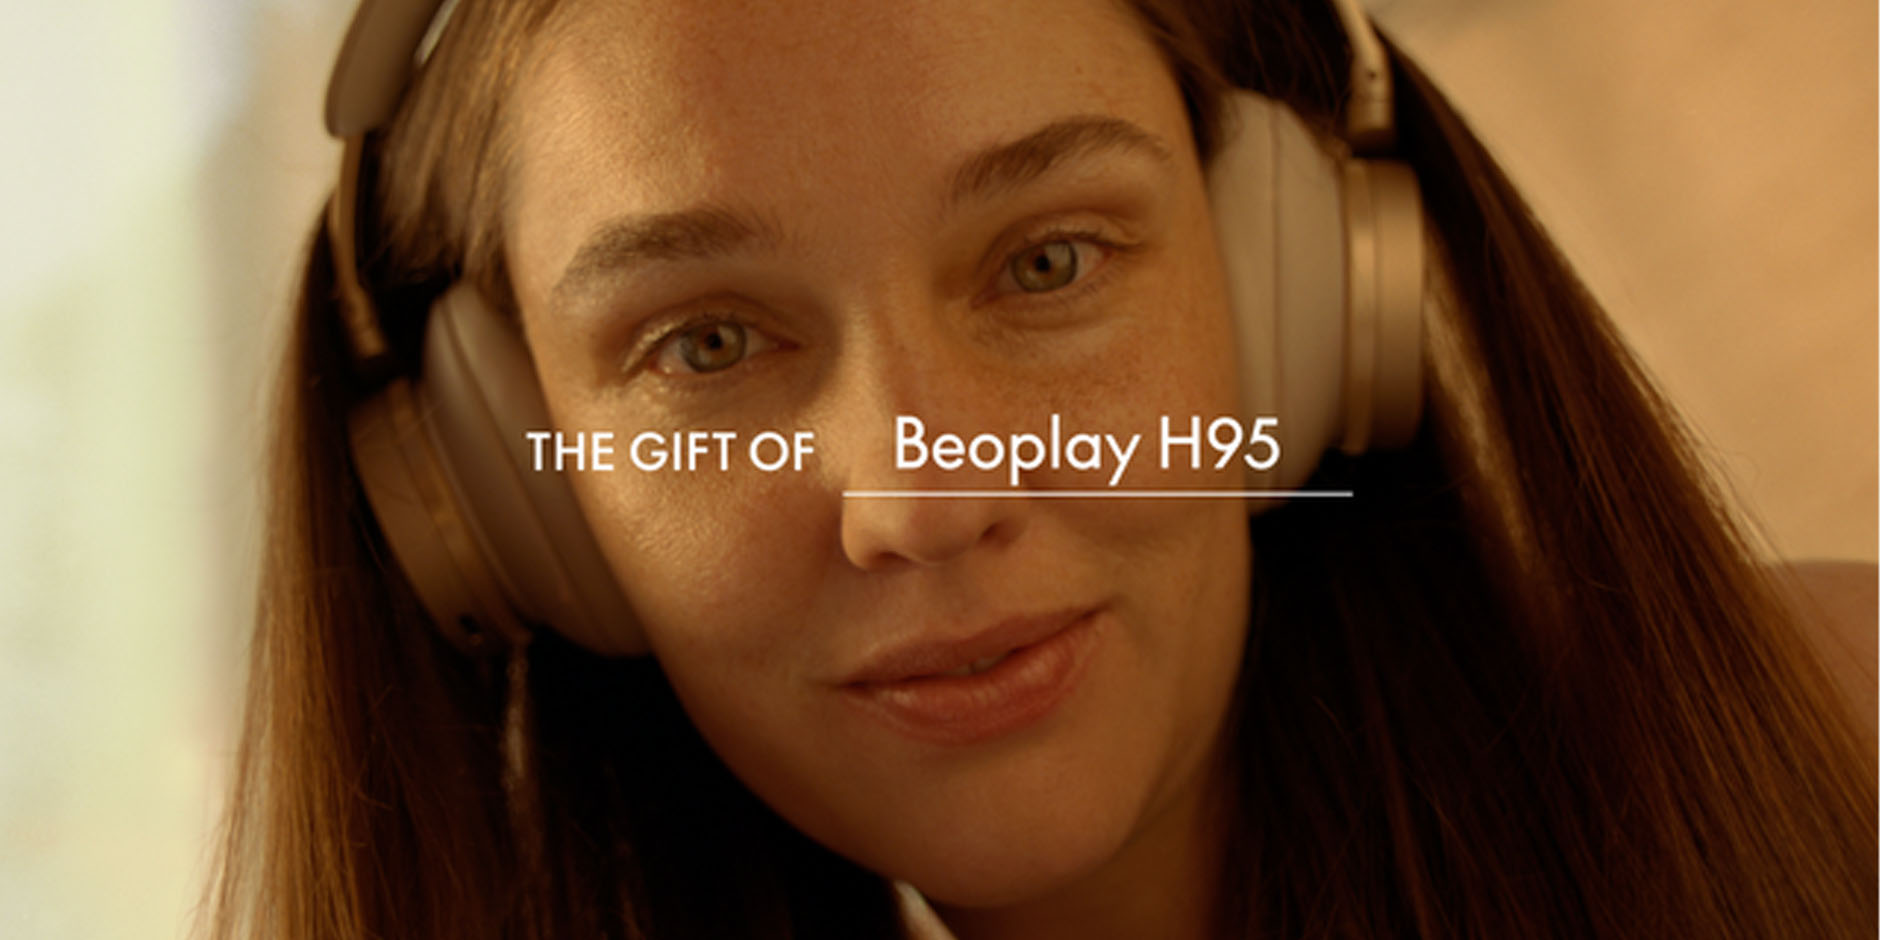 Beoplay H95 cuffie